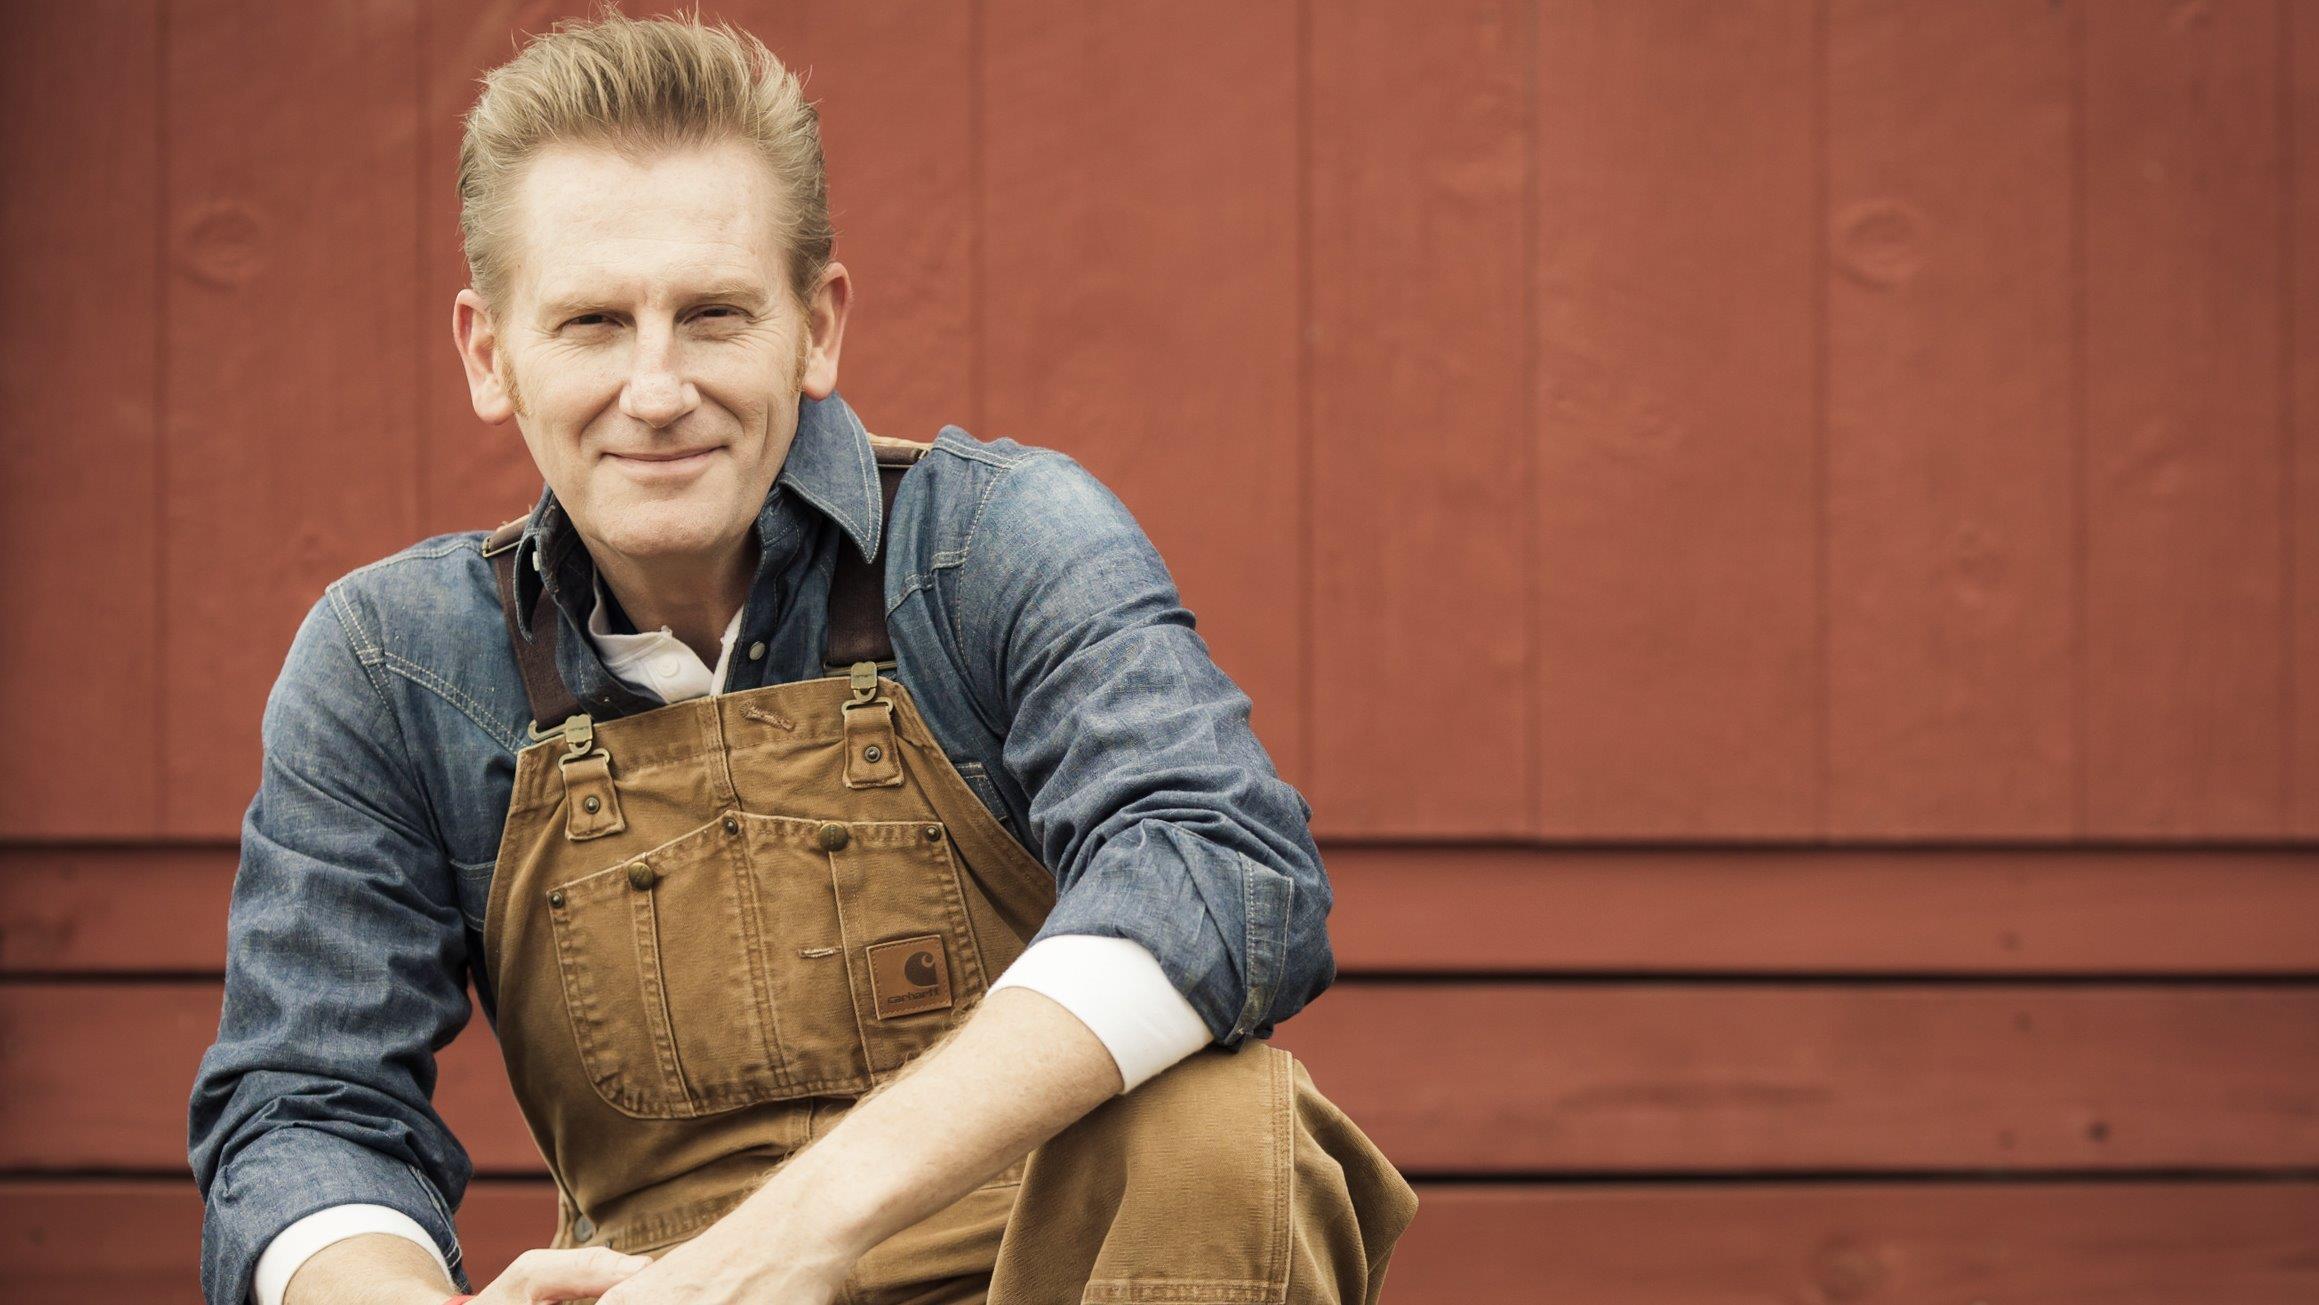 Rory Feek still believes God has a plan for everything